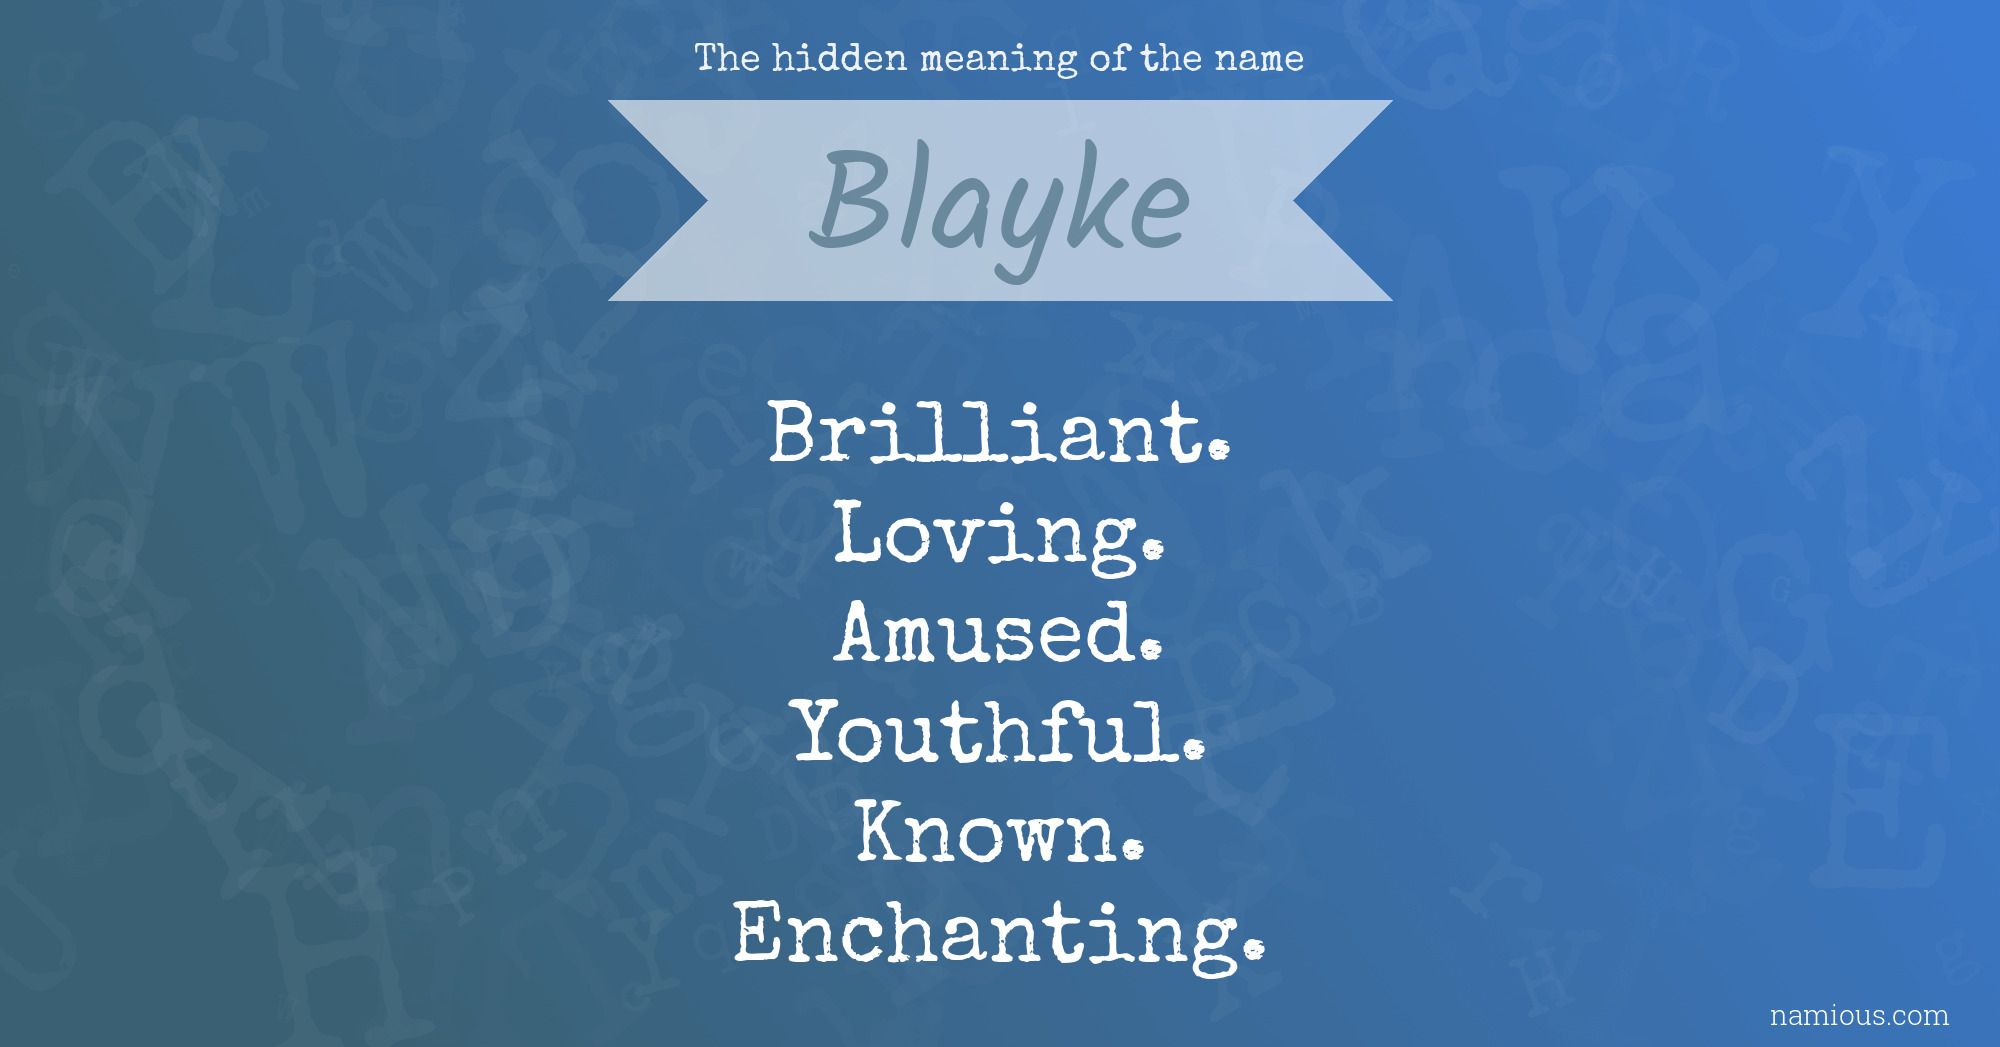 The hidden meaning of the name Blayke